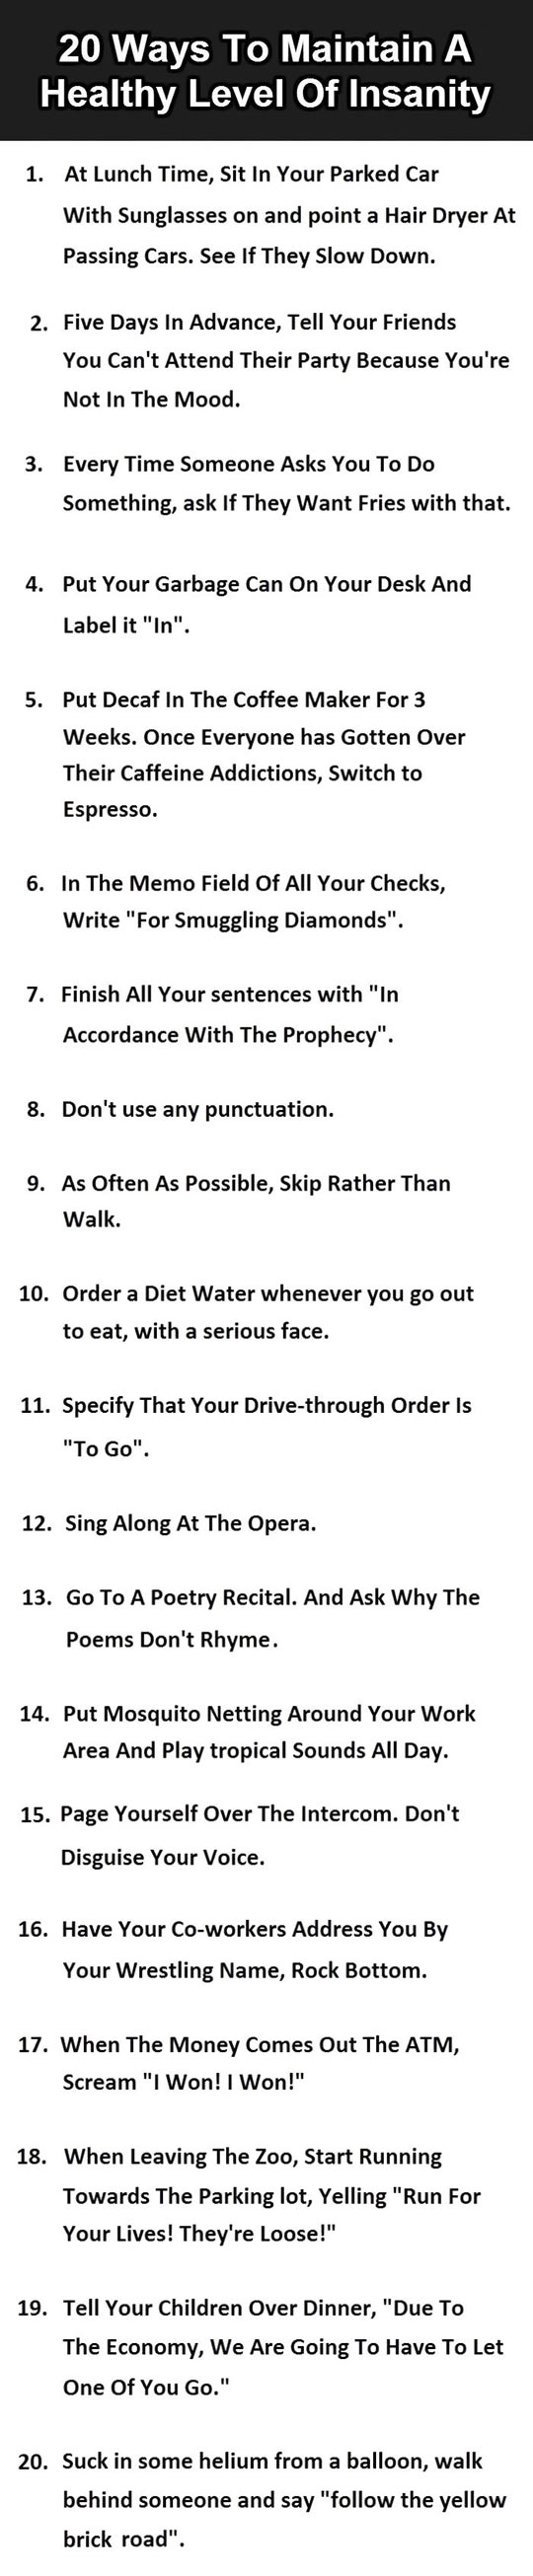 20 ways to maintain your insanity